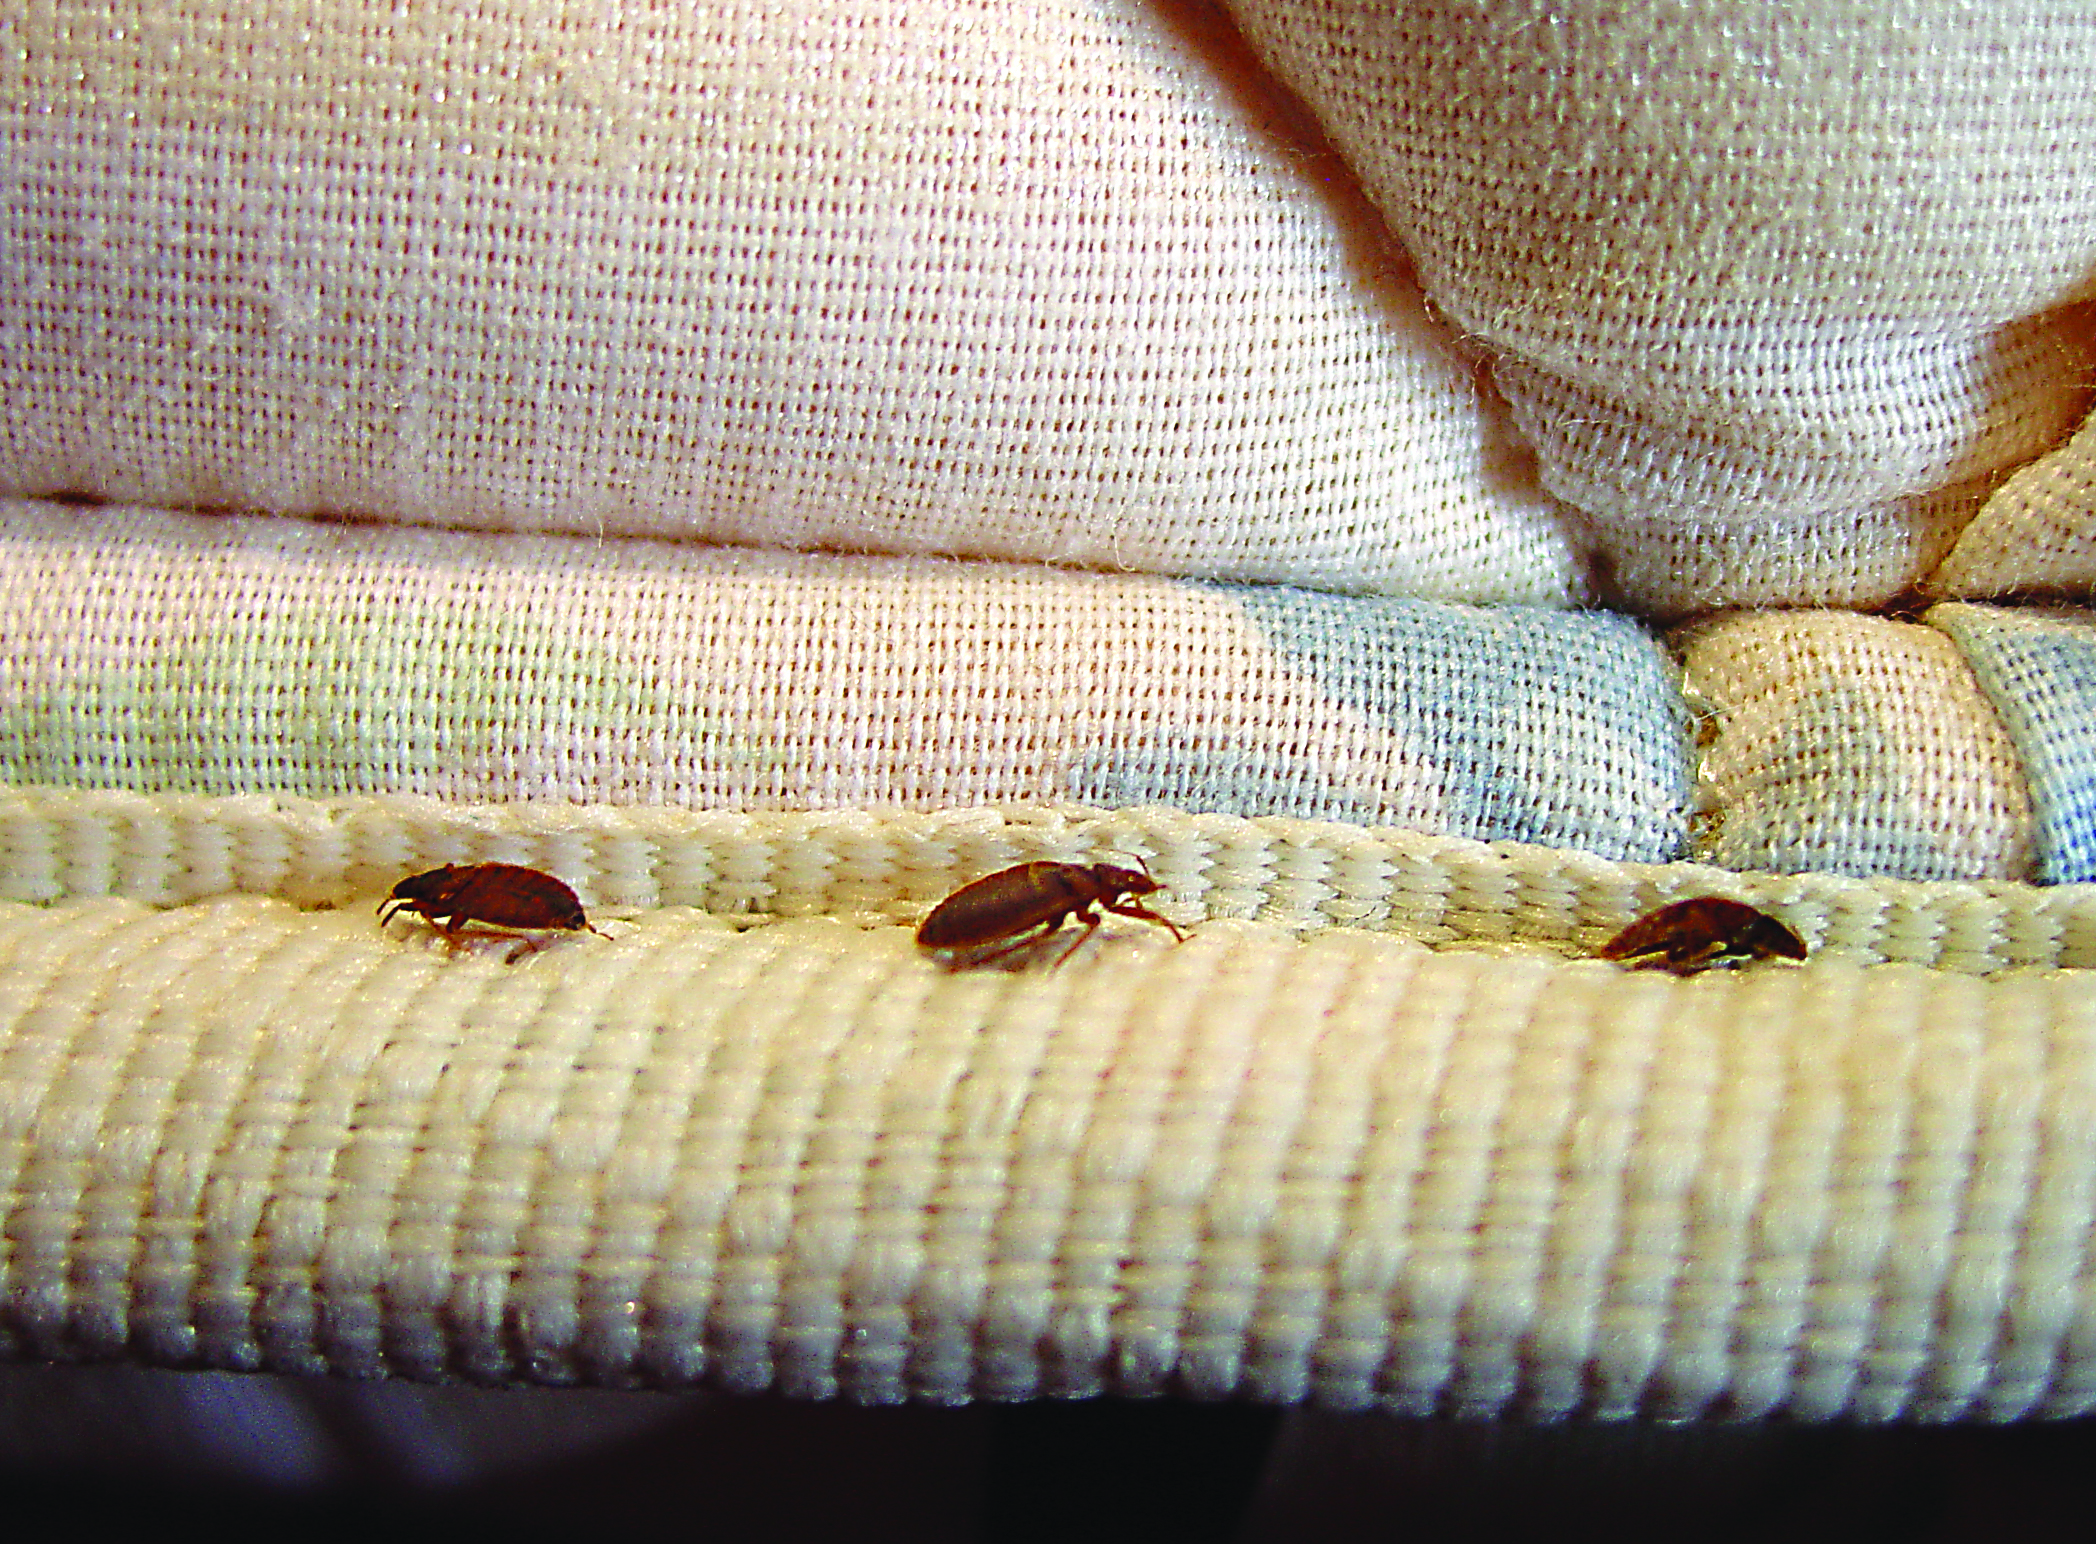 images of bed bugs on a mattress